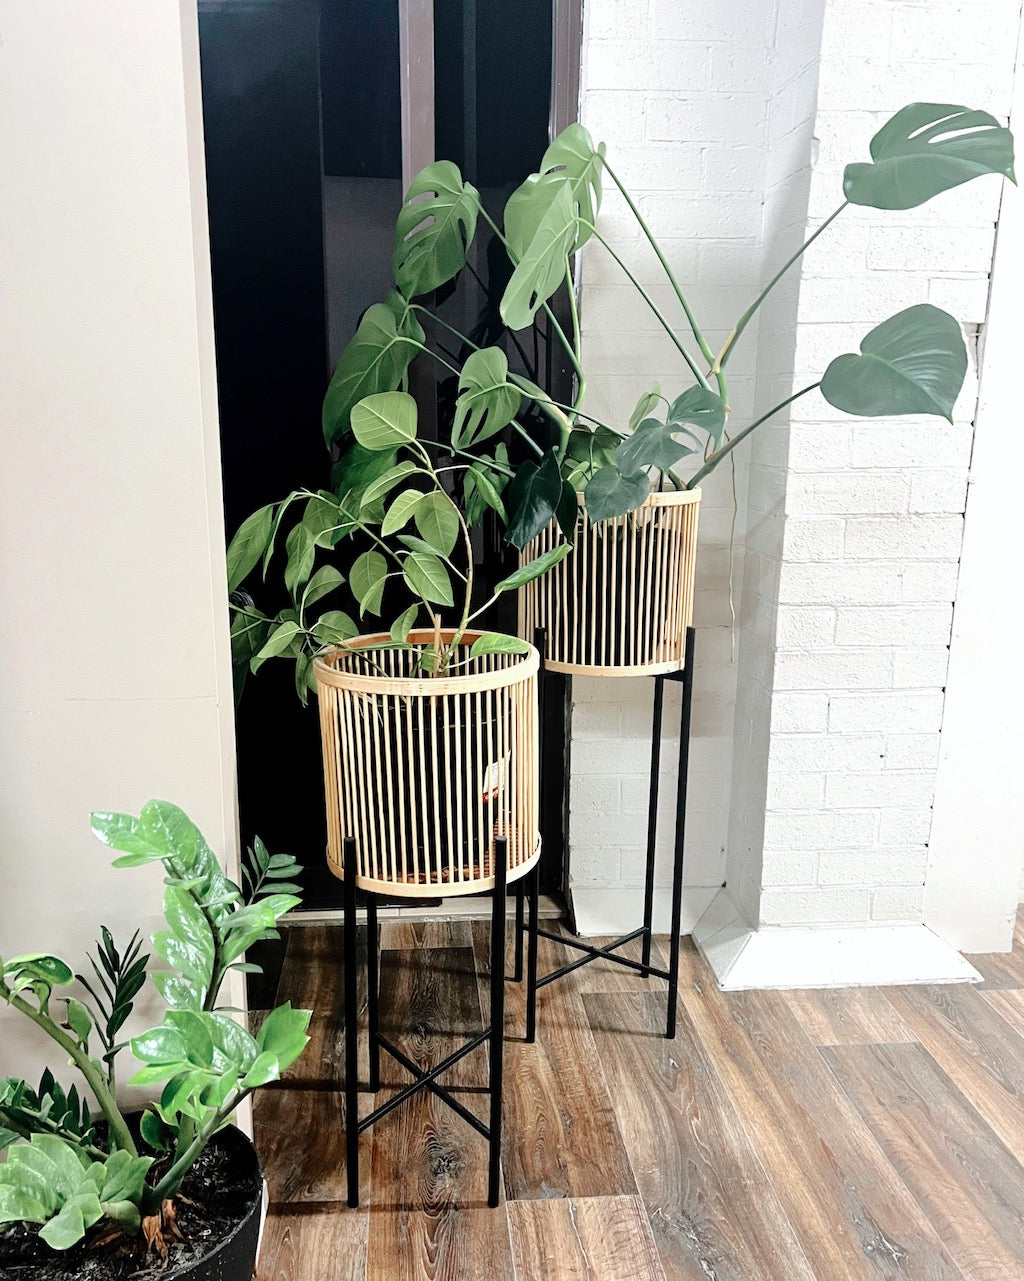 Rhythm Plant Stands - metal base - stunning natural bamboo basket - Large: 35x100cm - Small: 35x80cm - Basket size: 31x31cm | Salt&amp;Pepper |Bliss Gifts &amp; Homewares - Unit 8, 259 Princes Hwy Ulladulla - Shop Online &amp; In store - 0427795959, 44541523 - Australia wide shipping